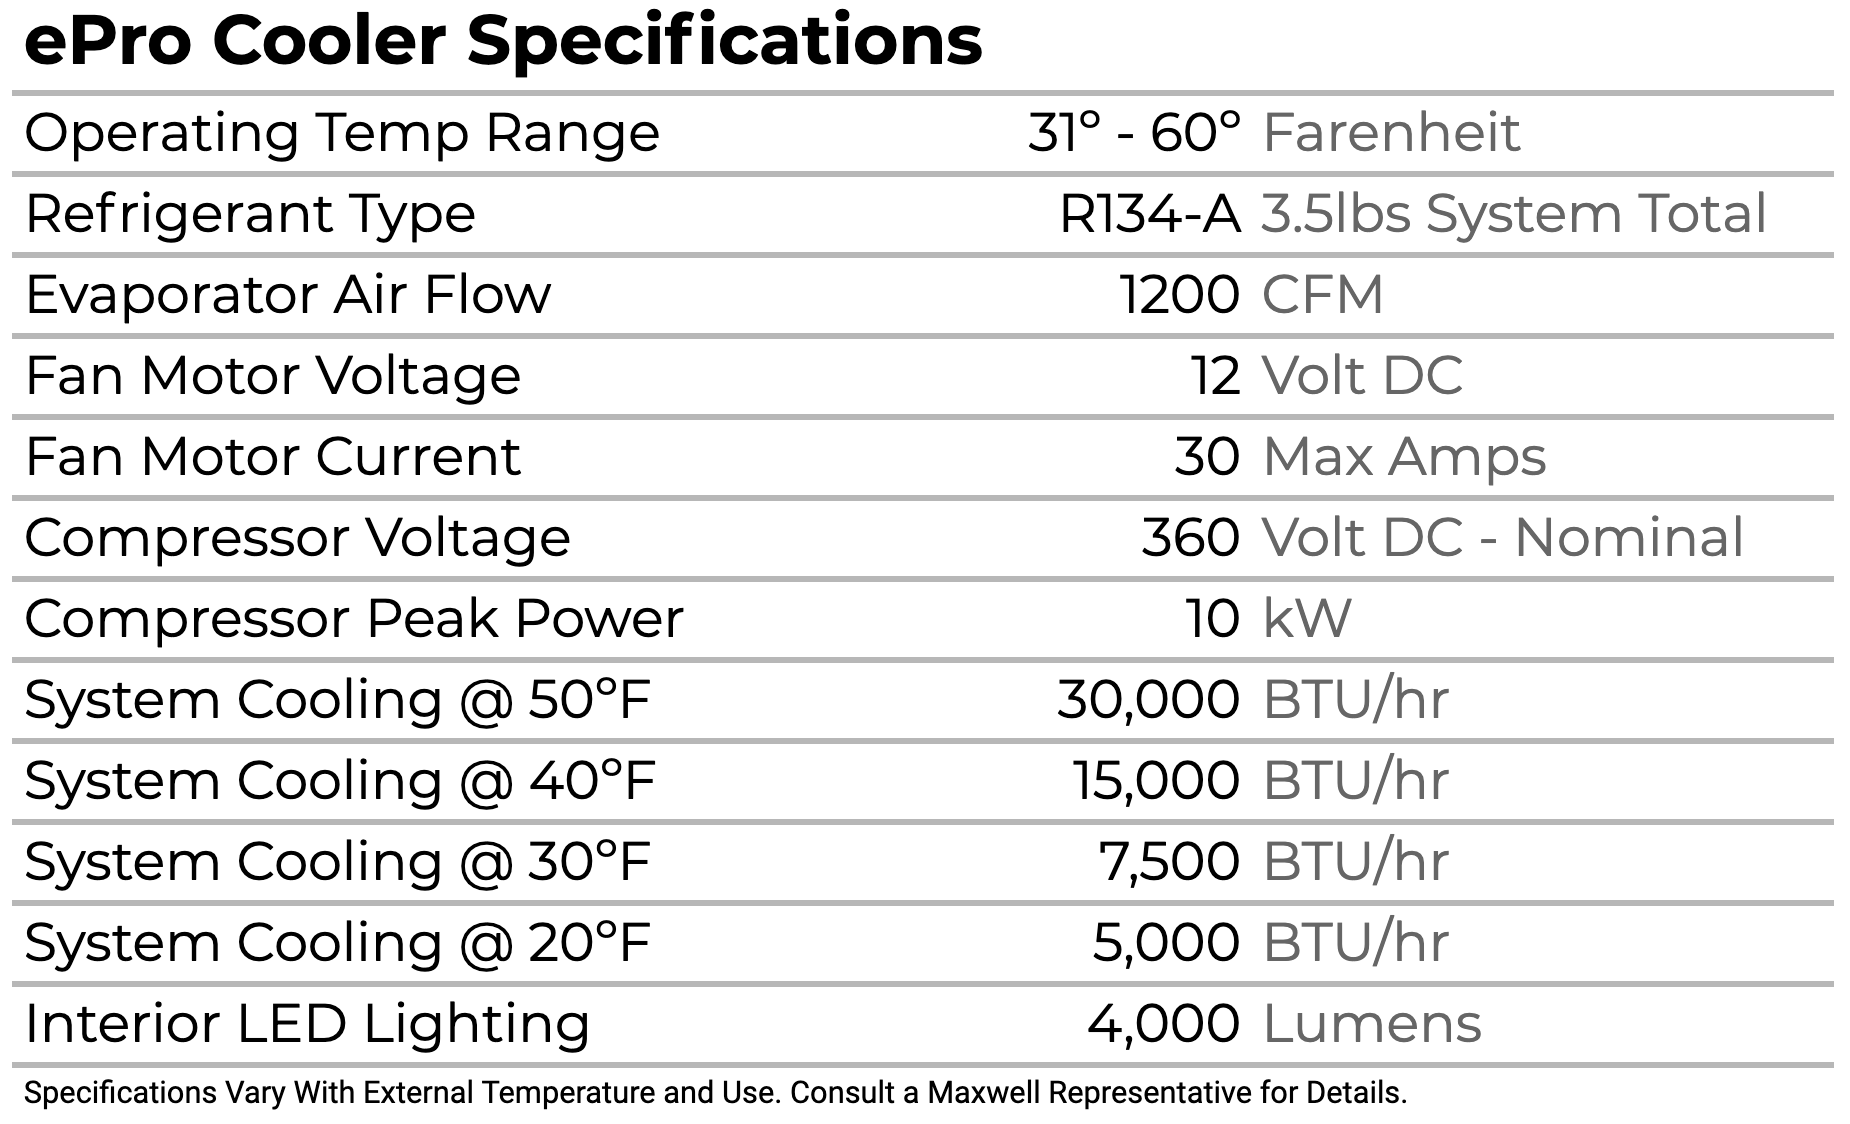 ePro Cooler Specifications